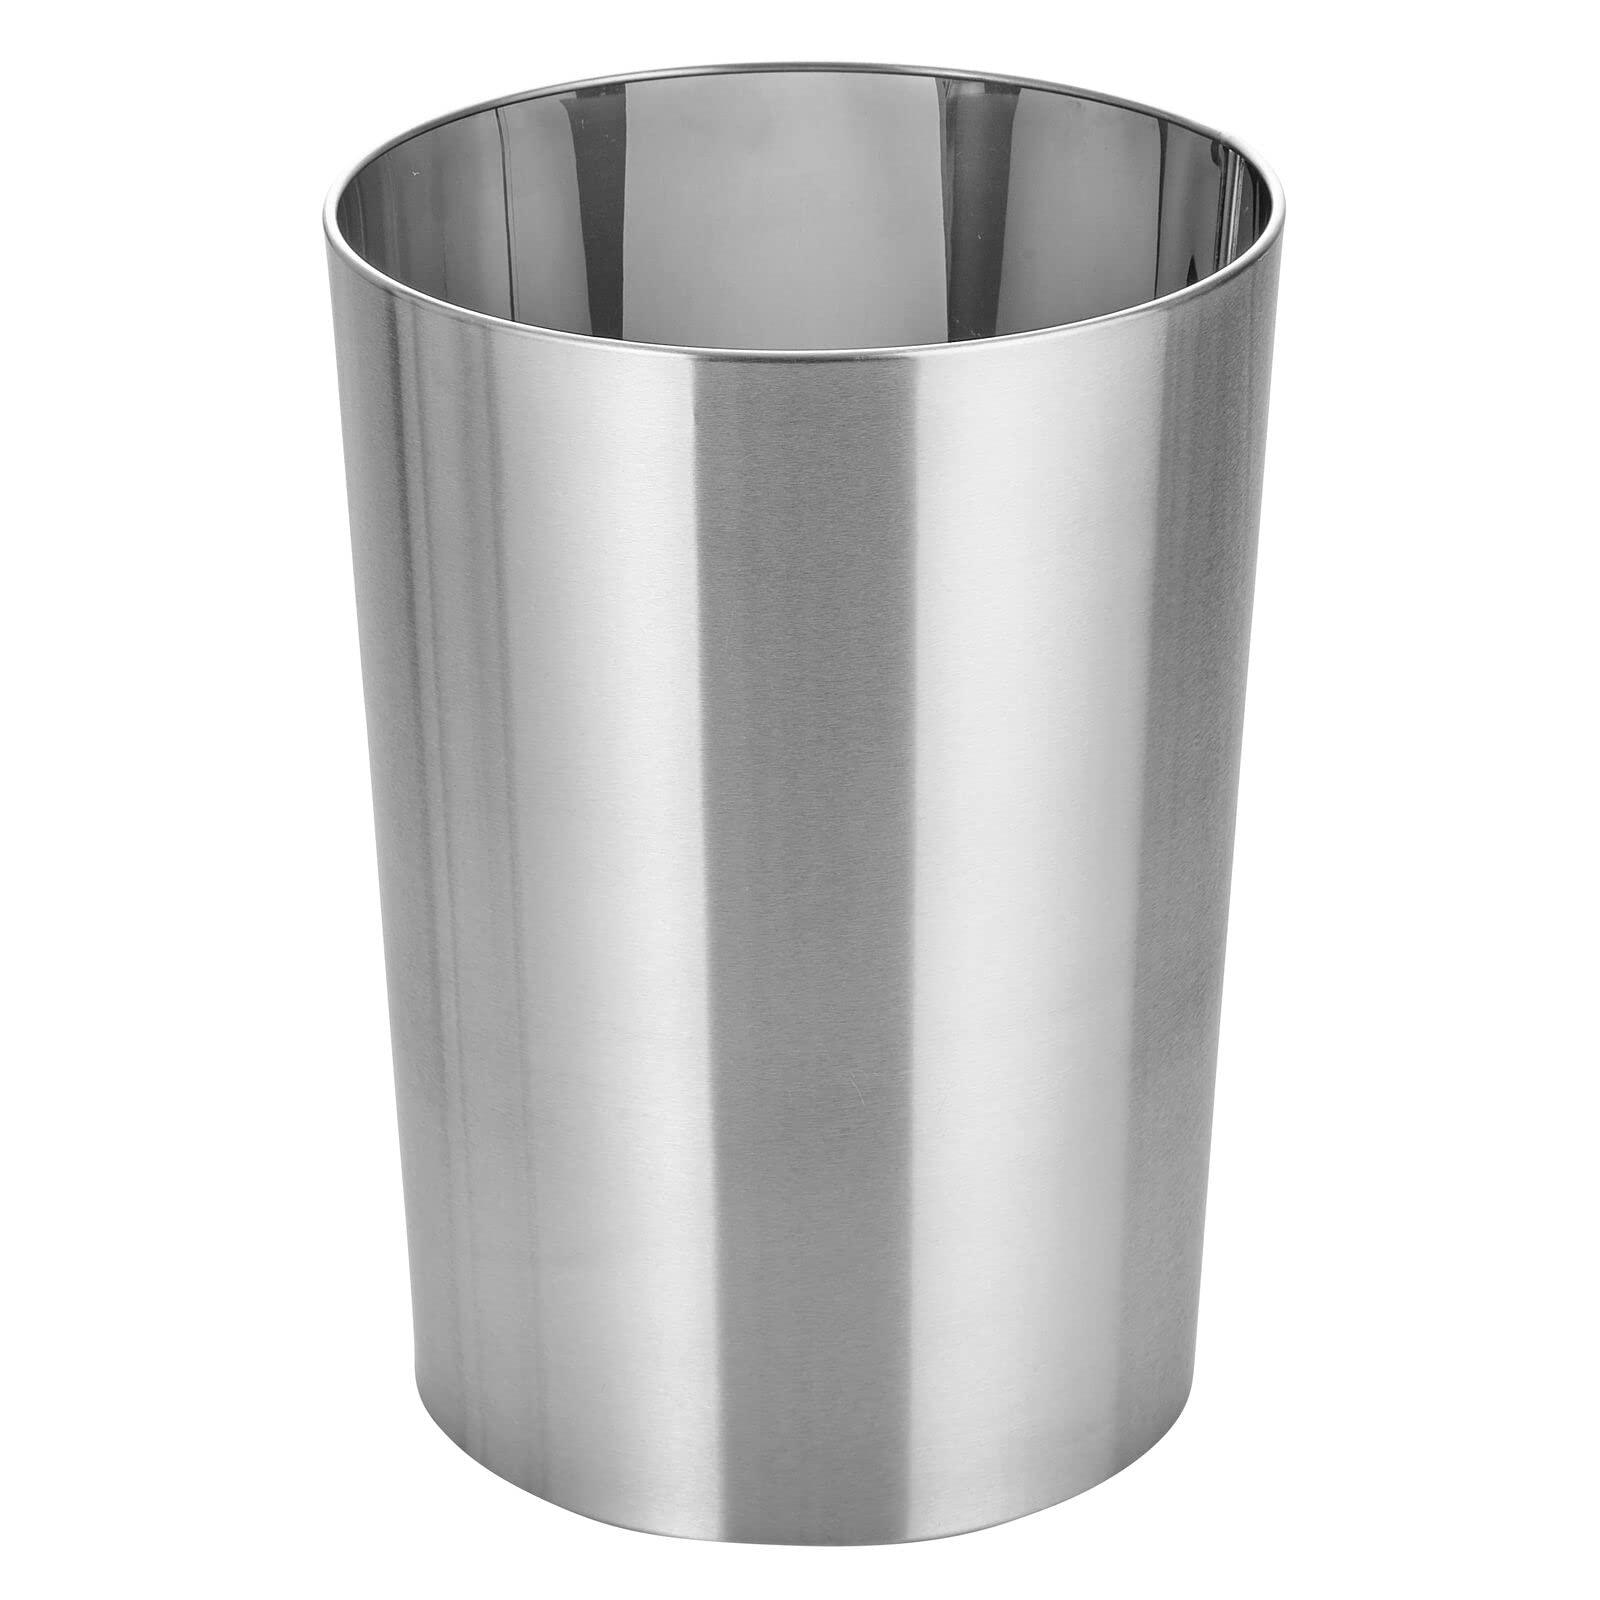 mDesign Stainless Steel Round Metal Trash Can